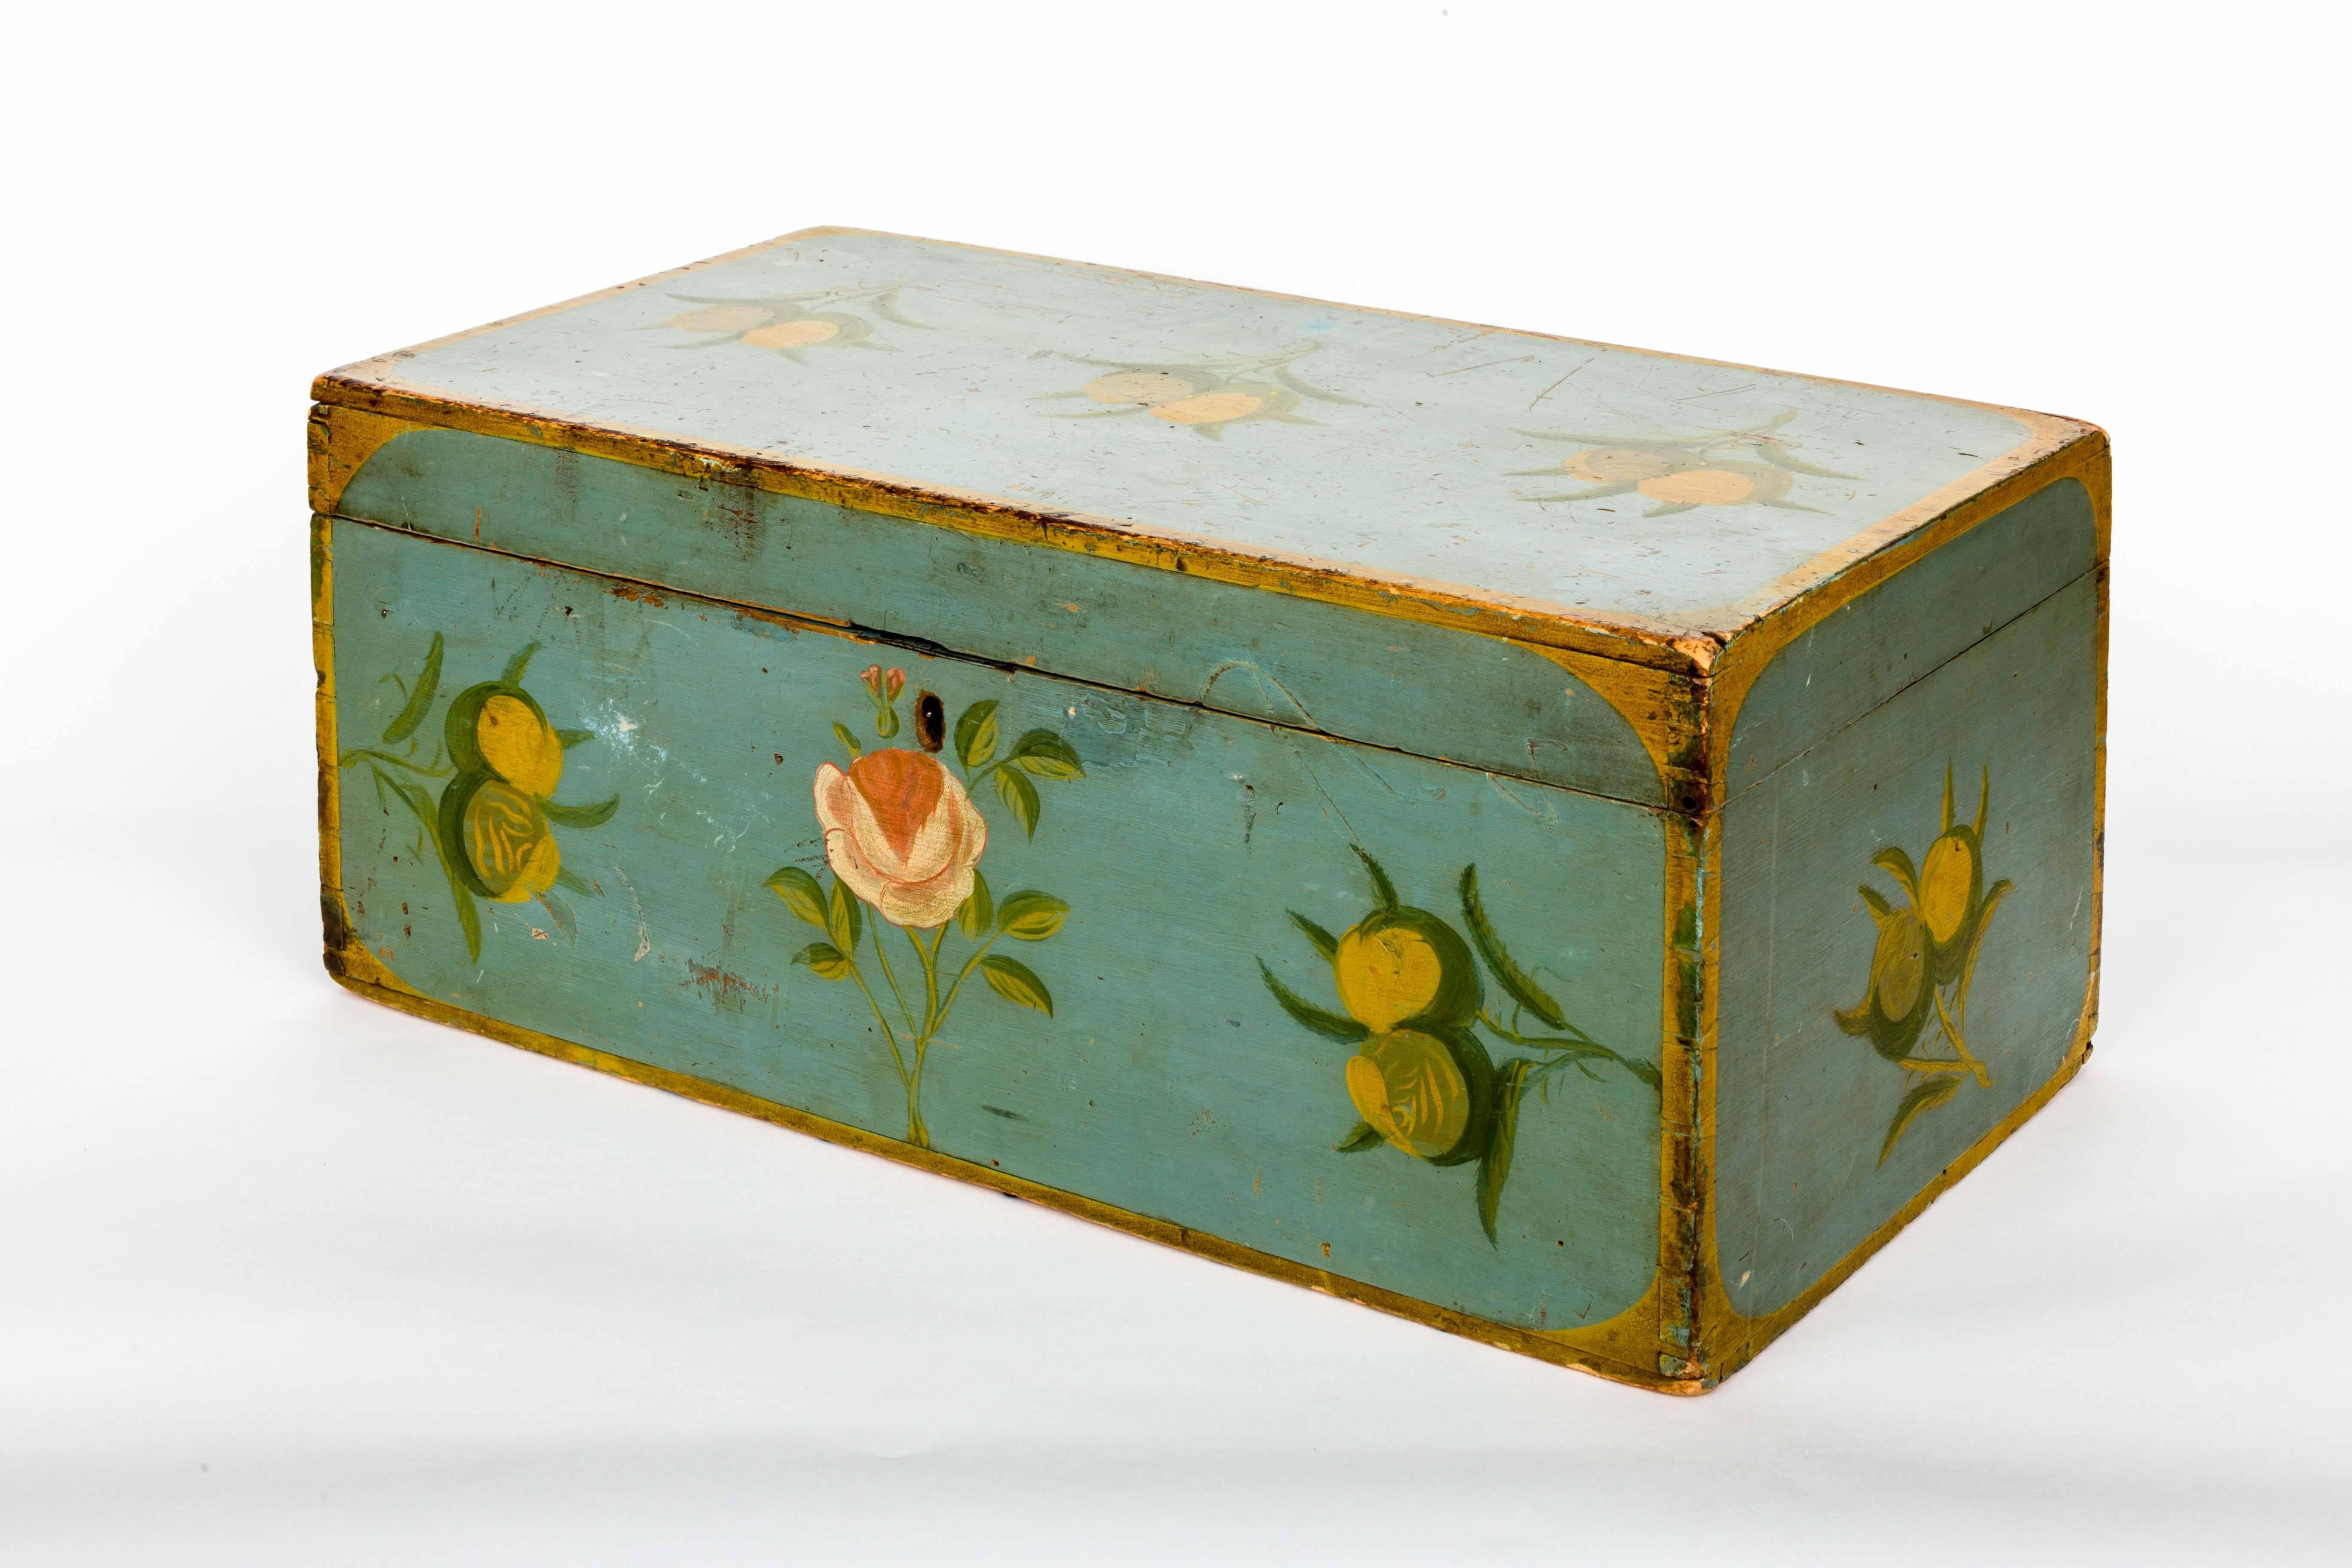 Painted American Folk Art box with floral motif and yellow trim.